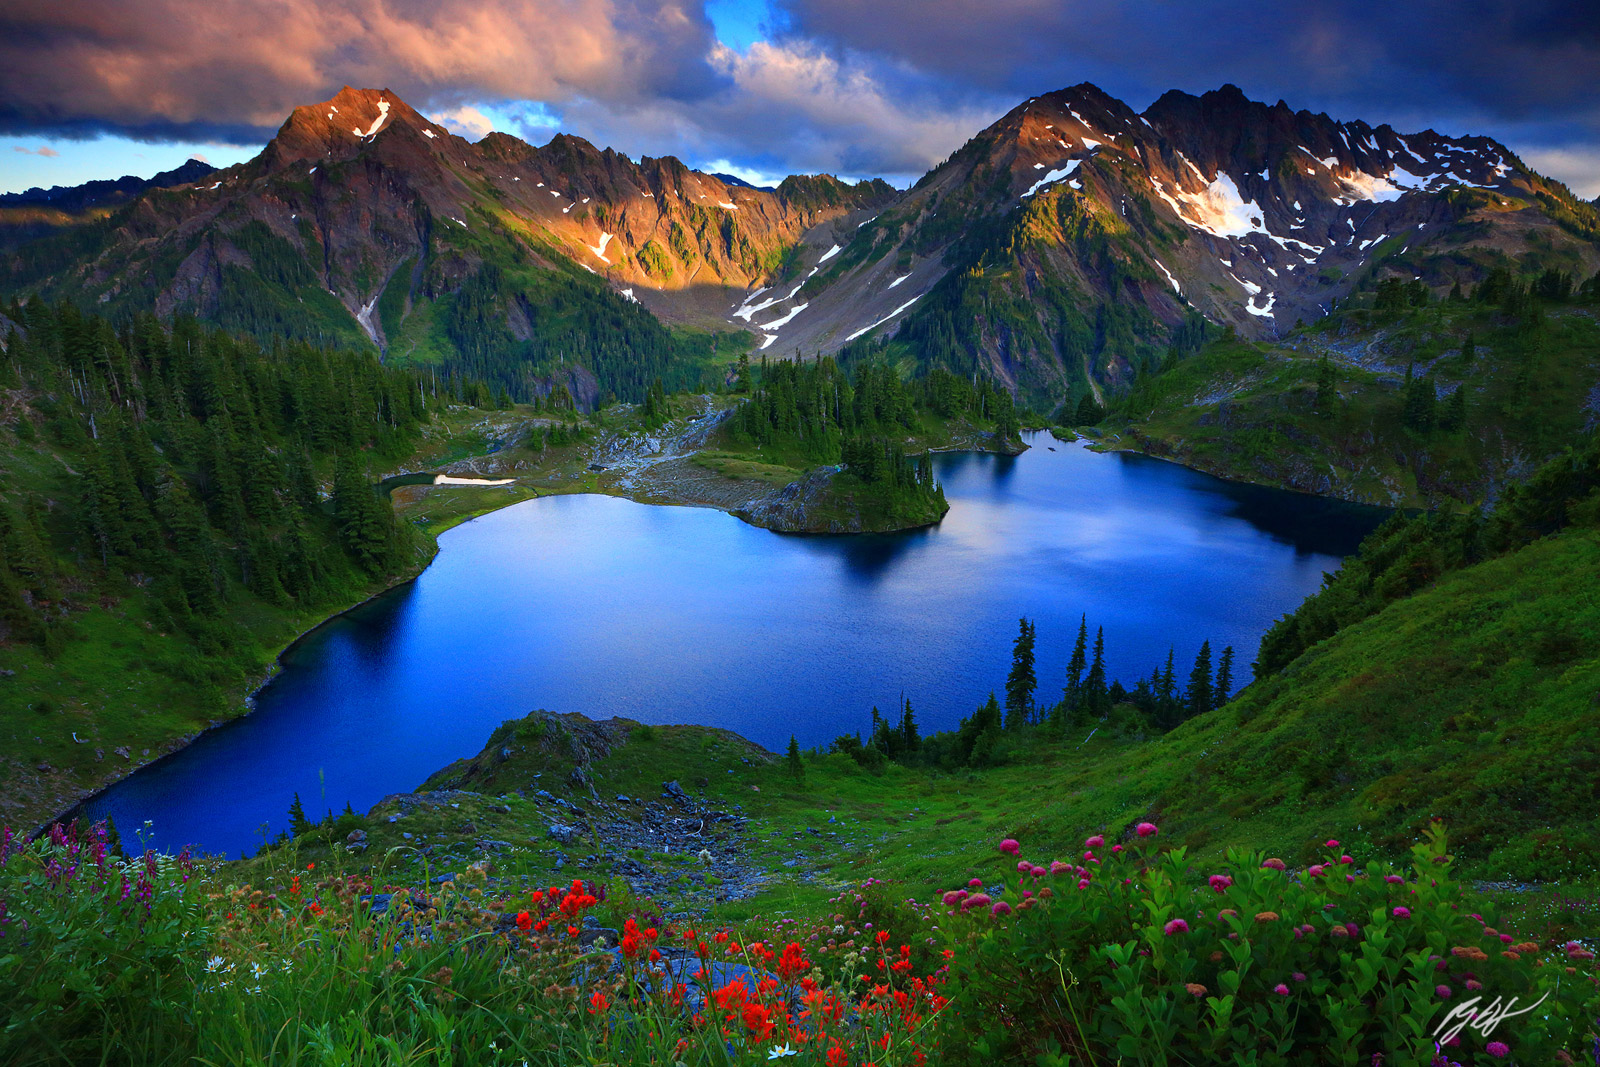 Sunset Over Heart Lake in the Olympic National Park Backcountry in Washington